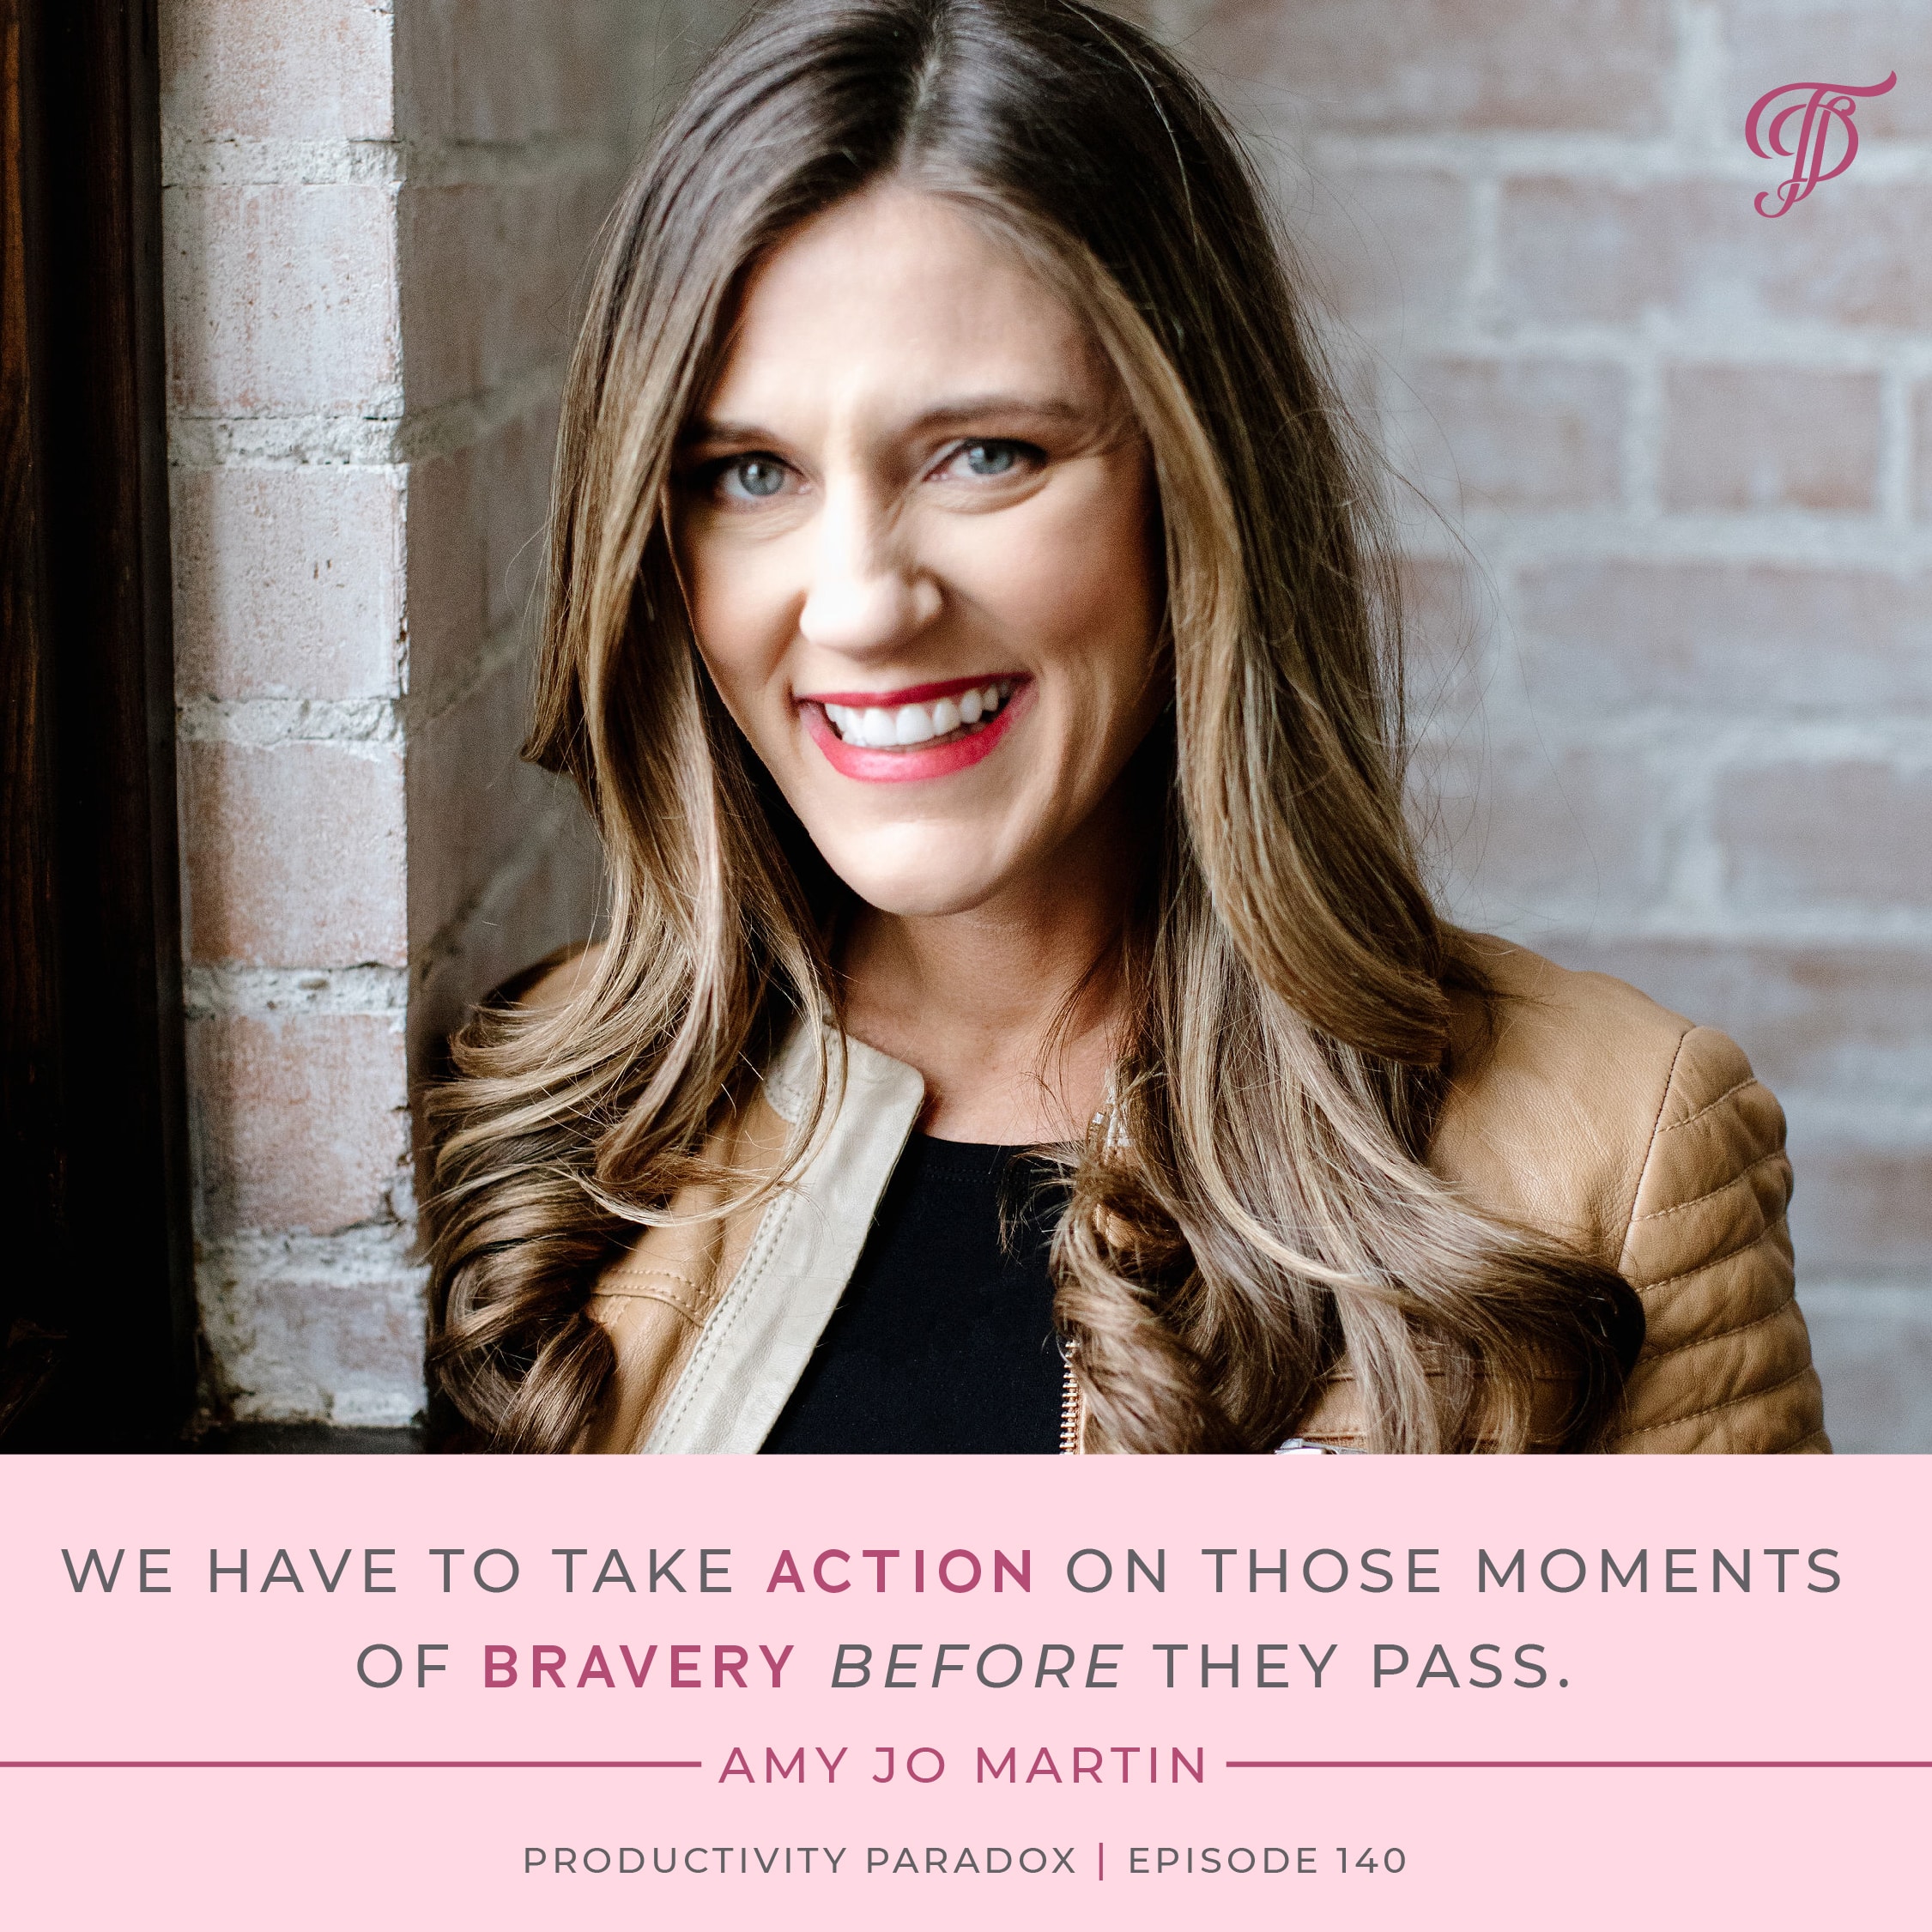 Amy Jo Martin podcast interview on The Intentional Advantage